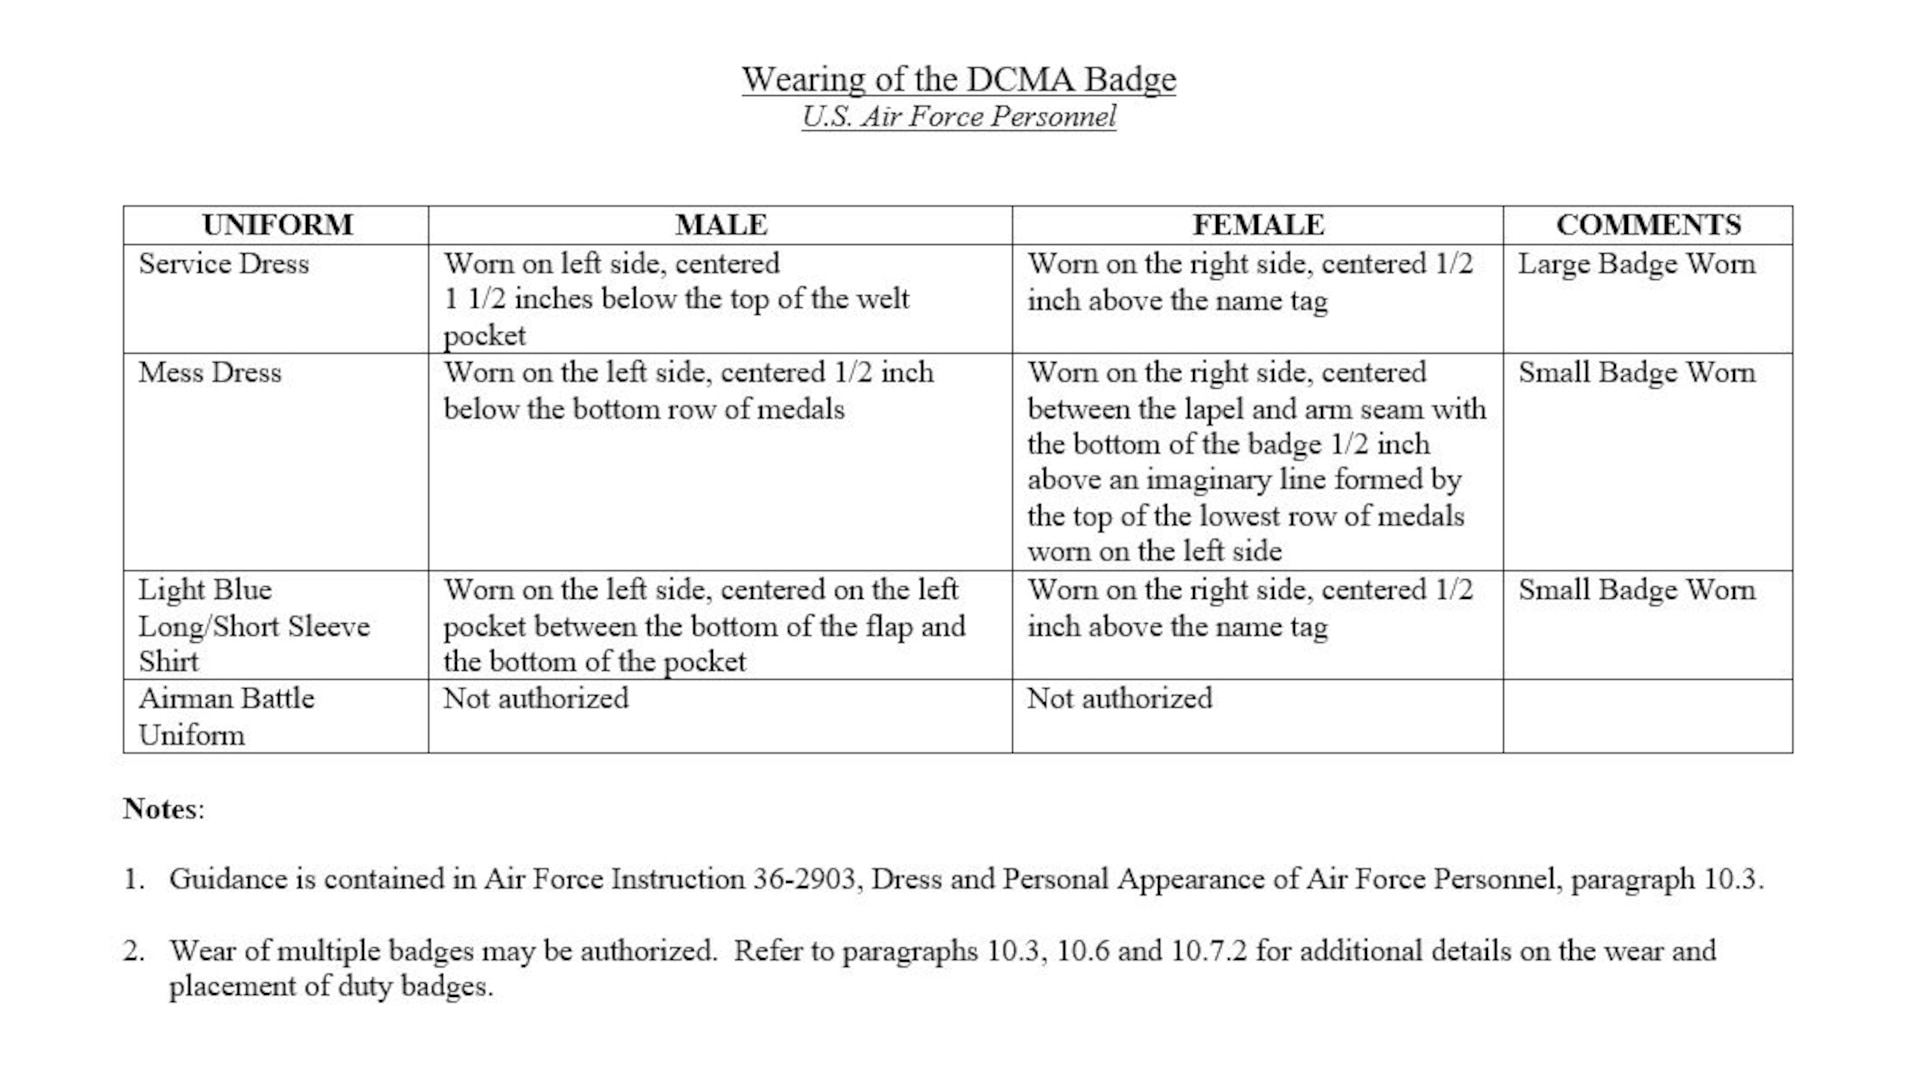 U.S. Air Force personnel assigned to the Defense Contract Management Agency are authorized to wear the approved agency badge in accordance with Air Force Instruction 36-2903, Dress and Personal Appearance of Air Force Personnel, paragraph 10.3. (DCMA graphic).